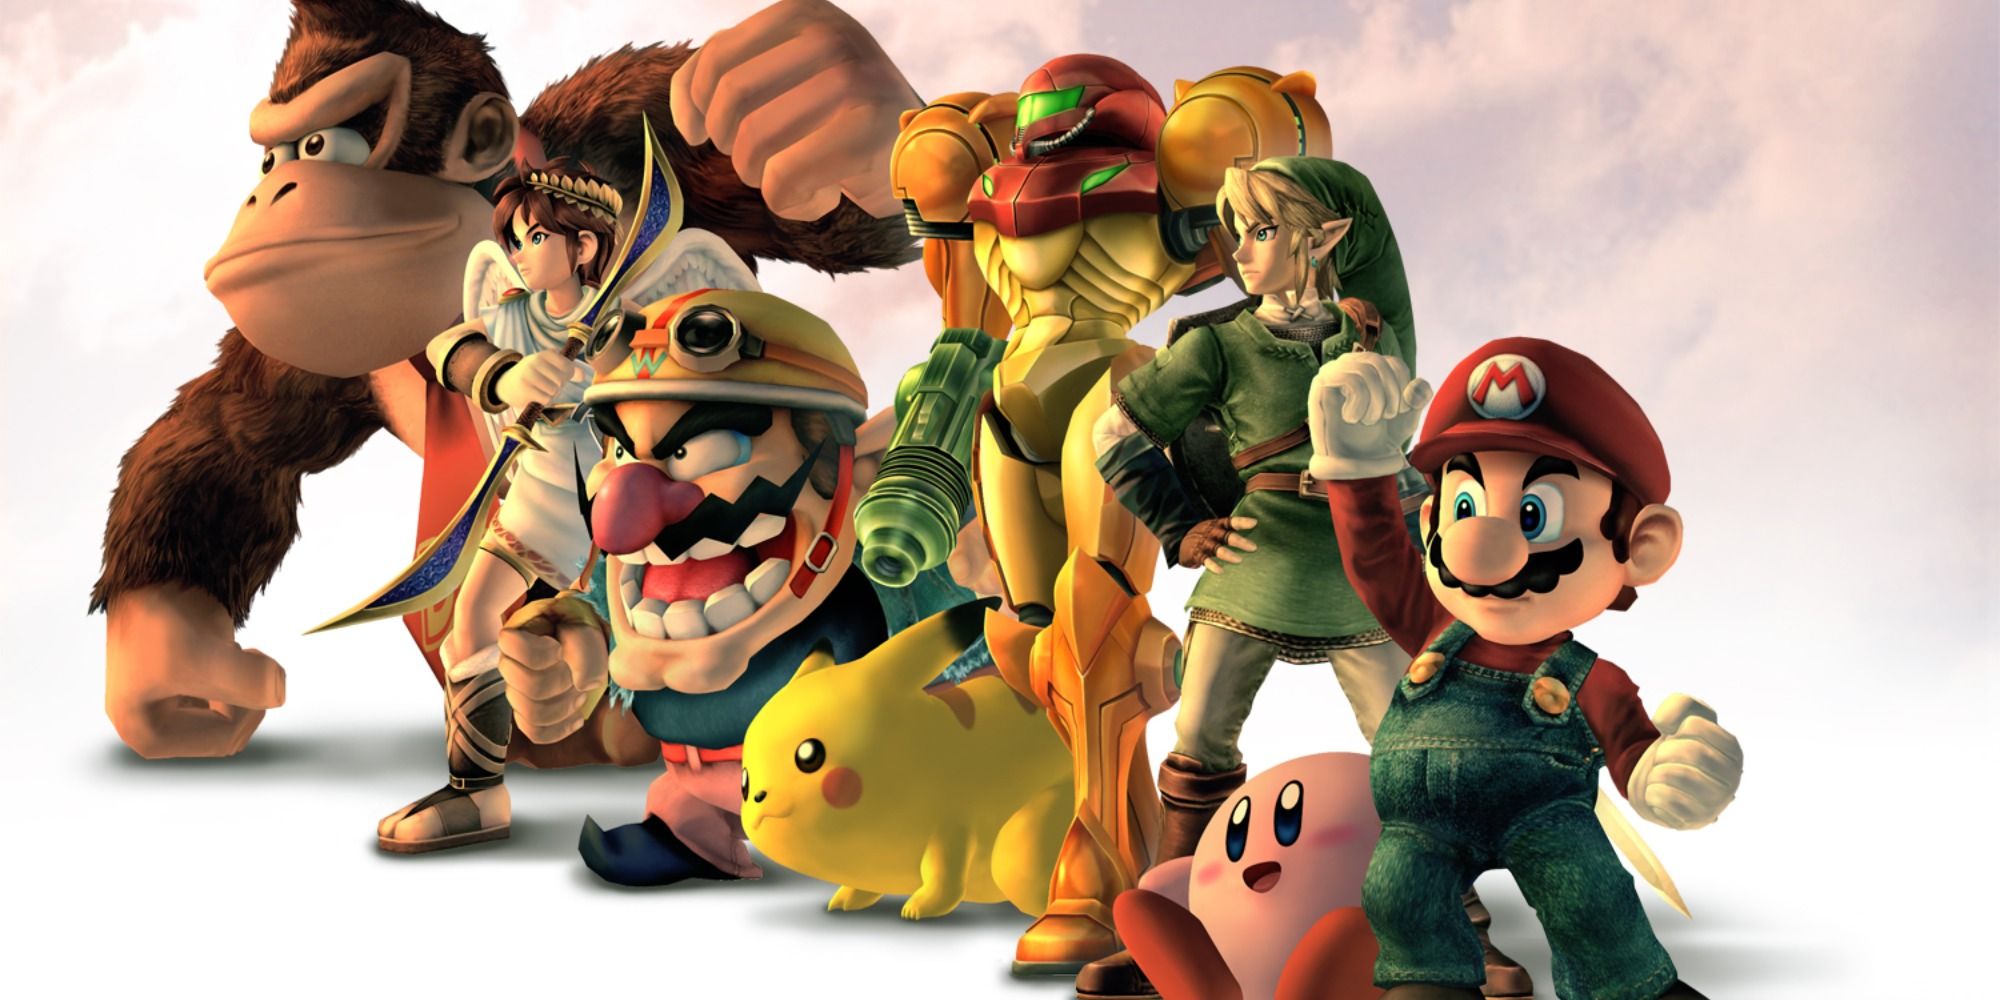 Key Art showing some of the characters is Super Smash Bros. Brawl